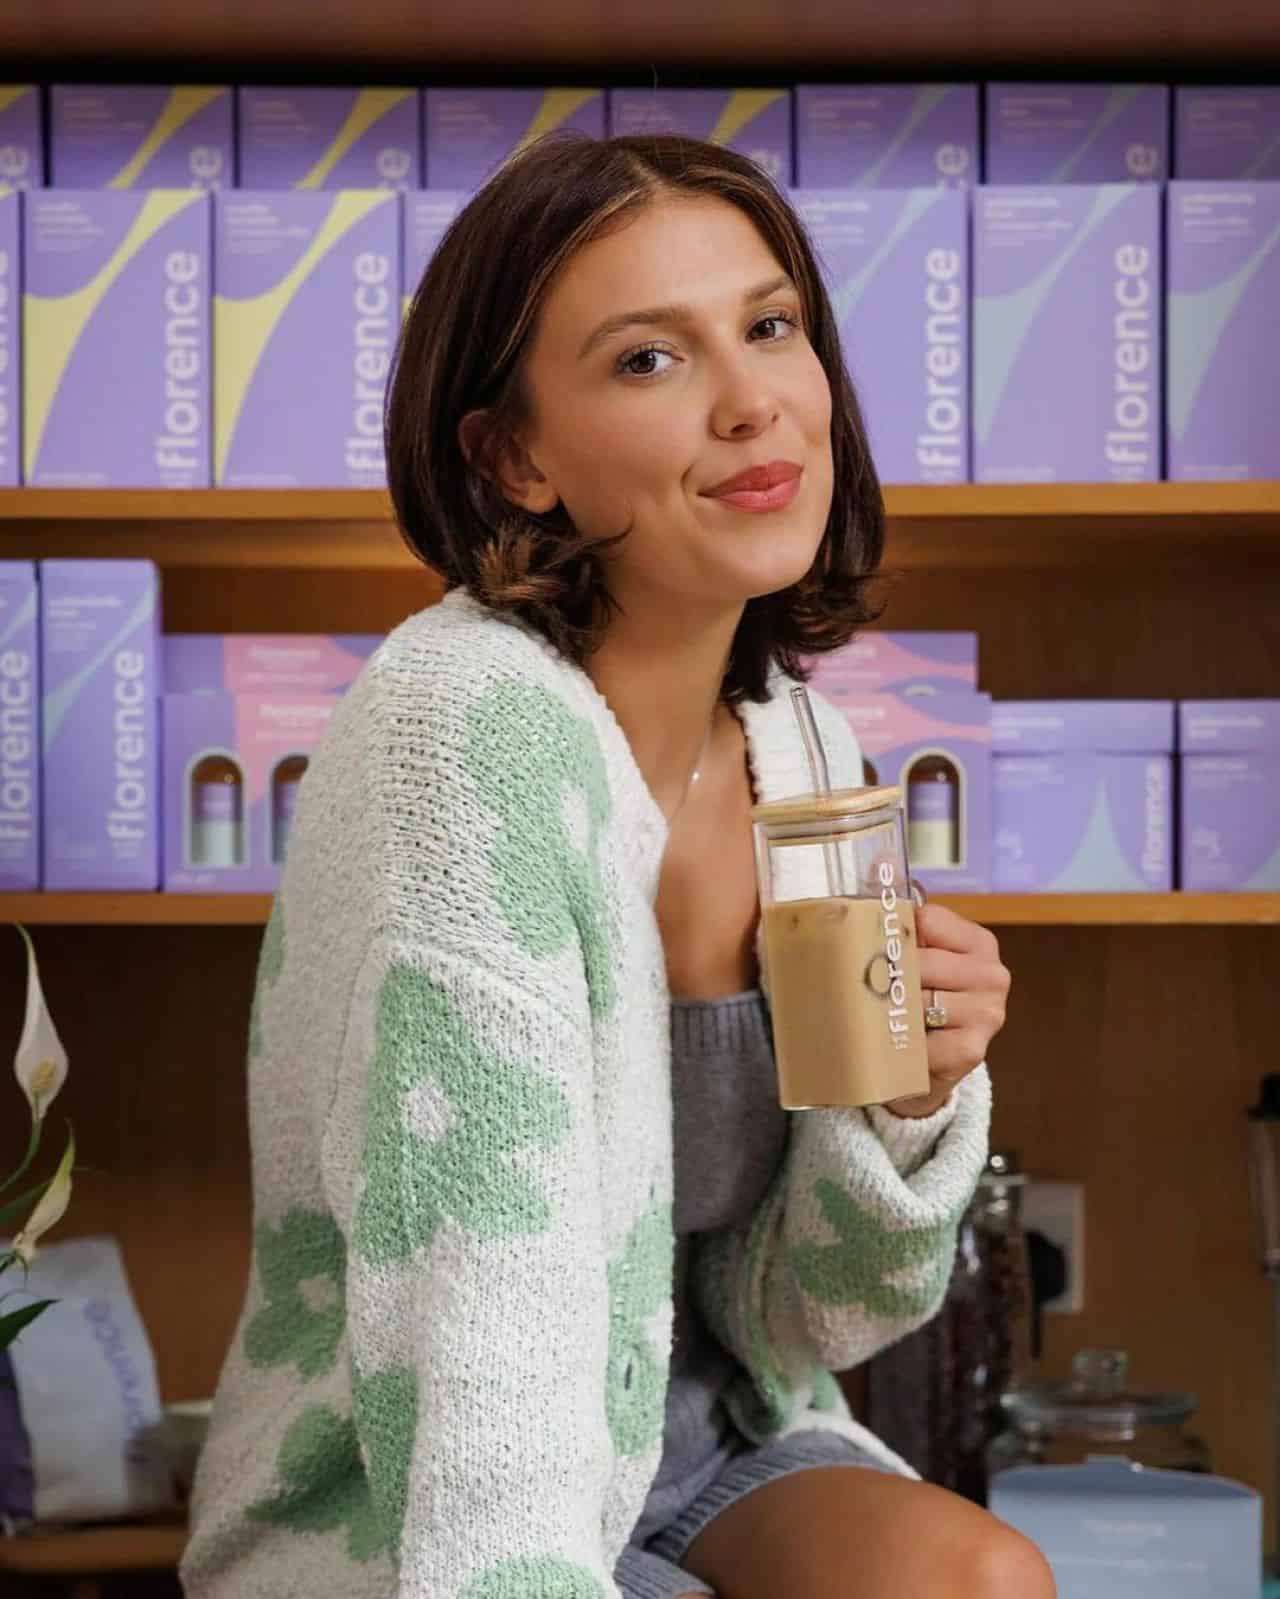 Millie Bobby Brown Is Full of Joy as She Promotes Her New Coffee Line